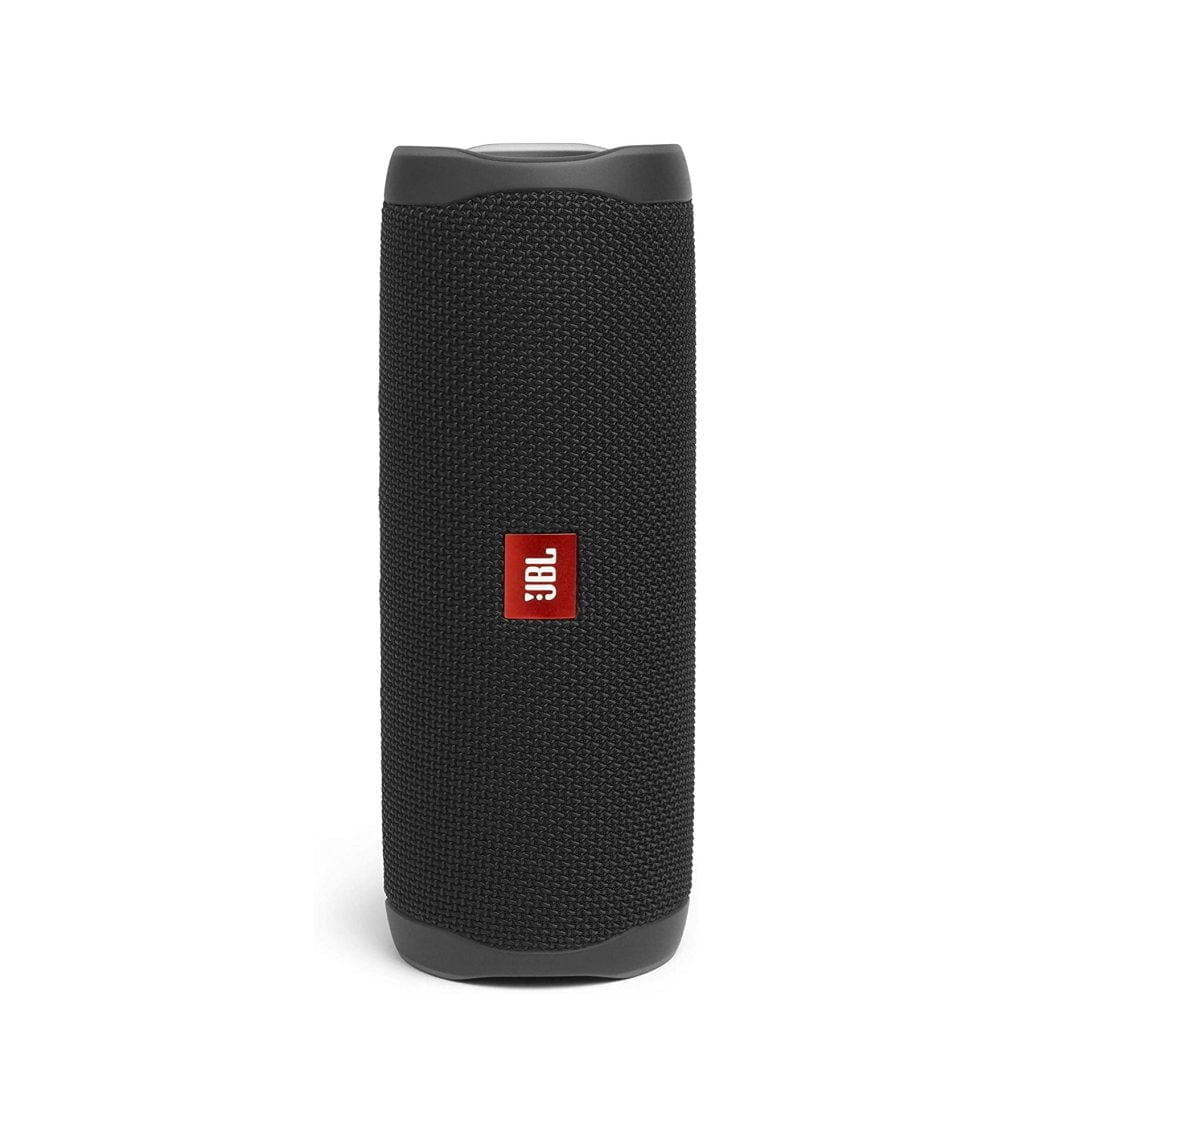 Jbl Https://Www.youtube.com/Watch?V=C8K7Ldyhyfm &Lt;Ul&Gt; &Lt;Li&Gt;&Lt;Span Class=&Quot;A-List-Item&Quot;&Gt;Sounds Better Than Ever, Feel Your Music. Flip 5’S All New Racetrack-Shaped Driver Delivers High Output. Enjoy Booming, Bass In A Compact Package. &Lt;/Span&Gt;&Lt;/Li&Gt; &Lt;Li&Gt;&Lt;Span Class=&Quot;A-List-Item&Quot;&Gt; Make A Splash With Ipx7 Waterproof Design. Flip 5 Is Ipx7 Waterproof Up To Three-Feet Deep For Fearless Outdoor Entertainment. &Lt;/Span&Gt;&Lt;/Li&Gt; &Lt;Li&Gt;&Lt;Span Class=&Quot;A-List-Item&Quot;&Gt; Crank Up The Fun With Party Boost, Party Boost Allows You To Pair Two Jbl Party Boost-Compatible Speakers Together For Stereo, Sound Or To Pump Up Your Party. &Lt;/Span&Gt;&Lt;/Li&Gt; &Lt;Li&Gt;&Lt;Span Class=&Quot;A-List-Item&Quot;&Gt; Bring The Party Anywhere, Don’t Sweat The Small Stuff Like Charging Your Battery. Flip 5 Gives You More Than 12 Hours Of, Playtime. Keep The Music Going Longer And Louder With Jbl’s Signature Sound. &Lt;/Span&Gt;&Lt;/Li&Gt; &Lt;/Ul&Gt; Jbl Flip5 Jbl Flip 5 Portable Bluetooth Wireless Speaker, Black